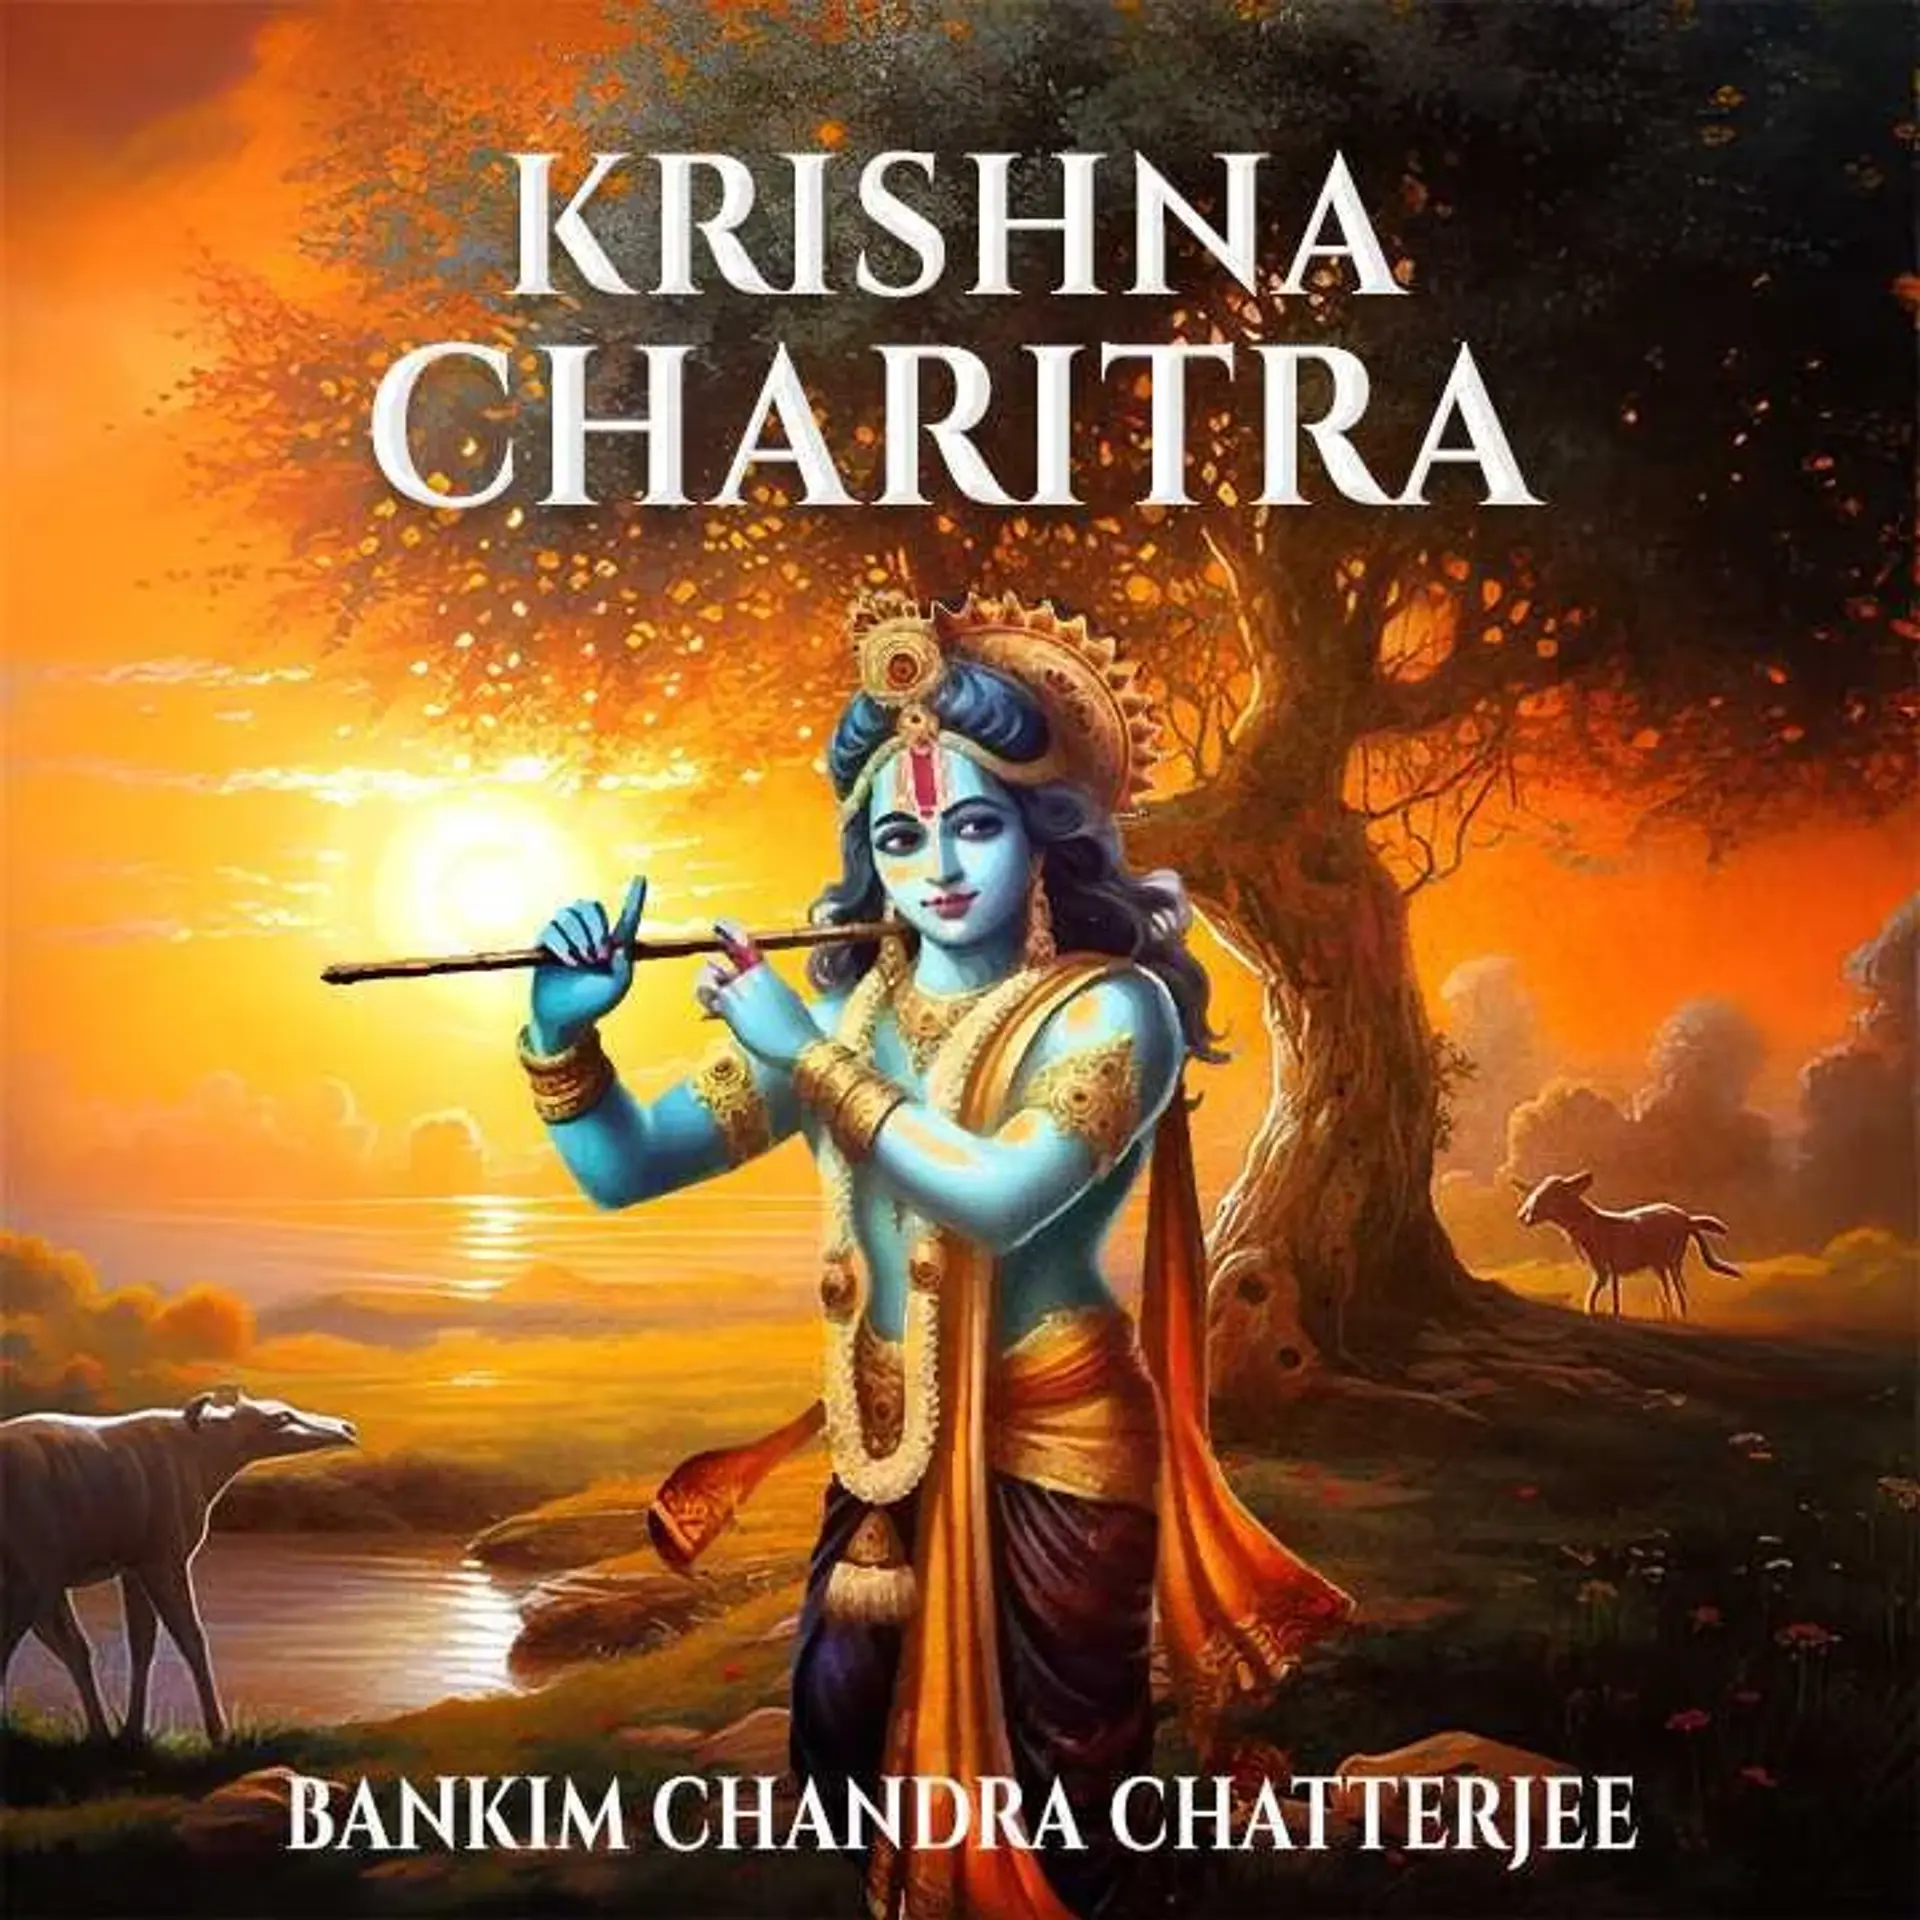 4. How to Find the Real Krishna | 